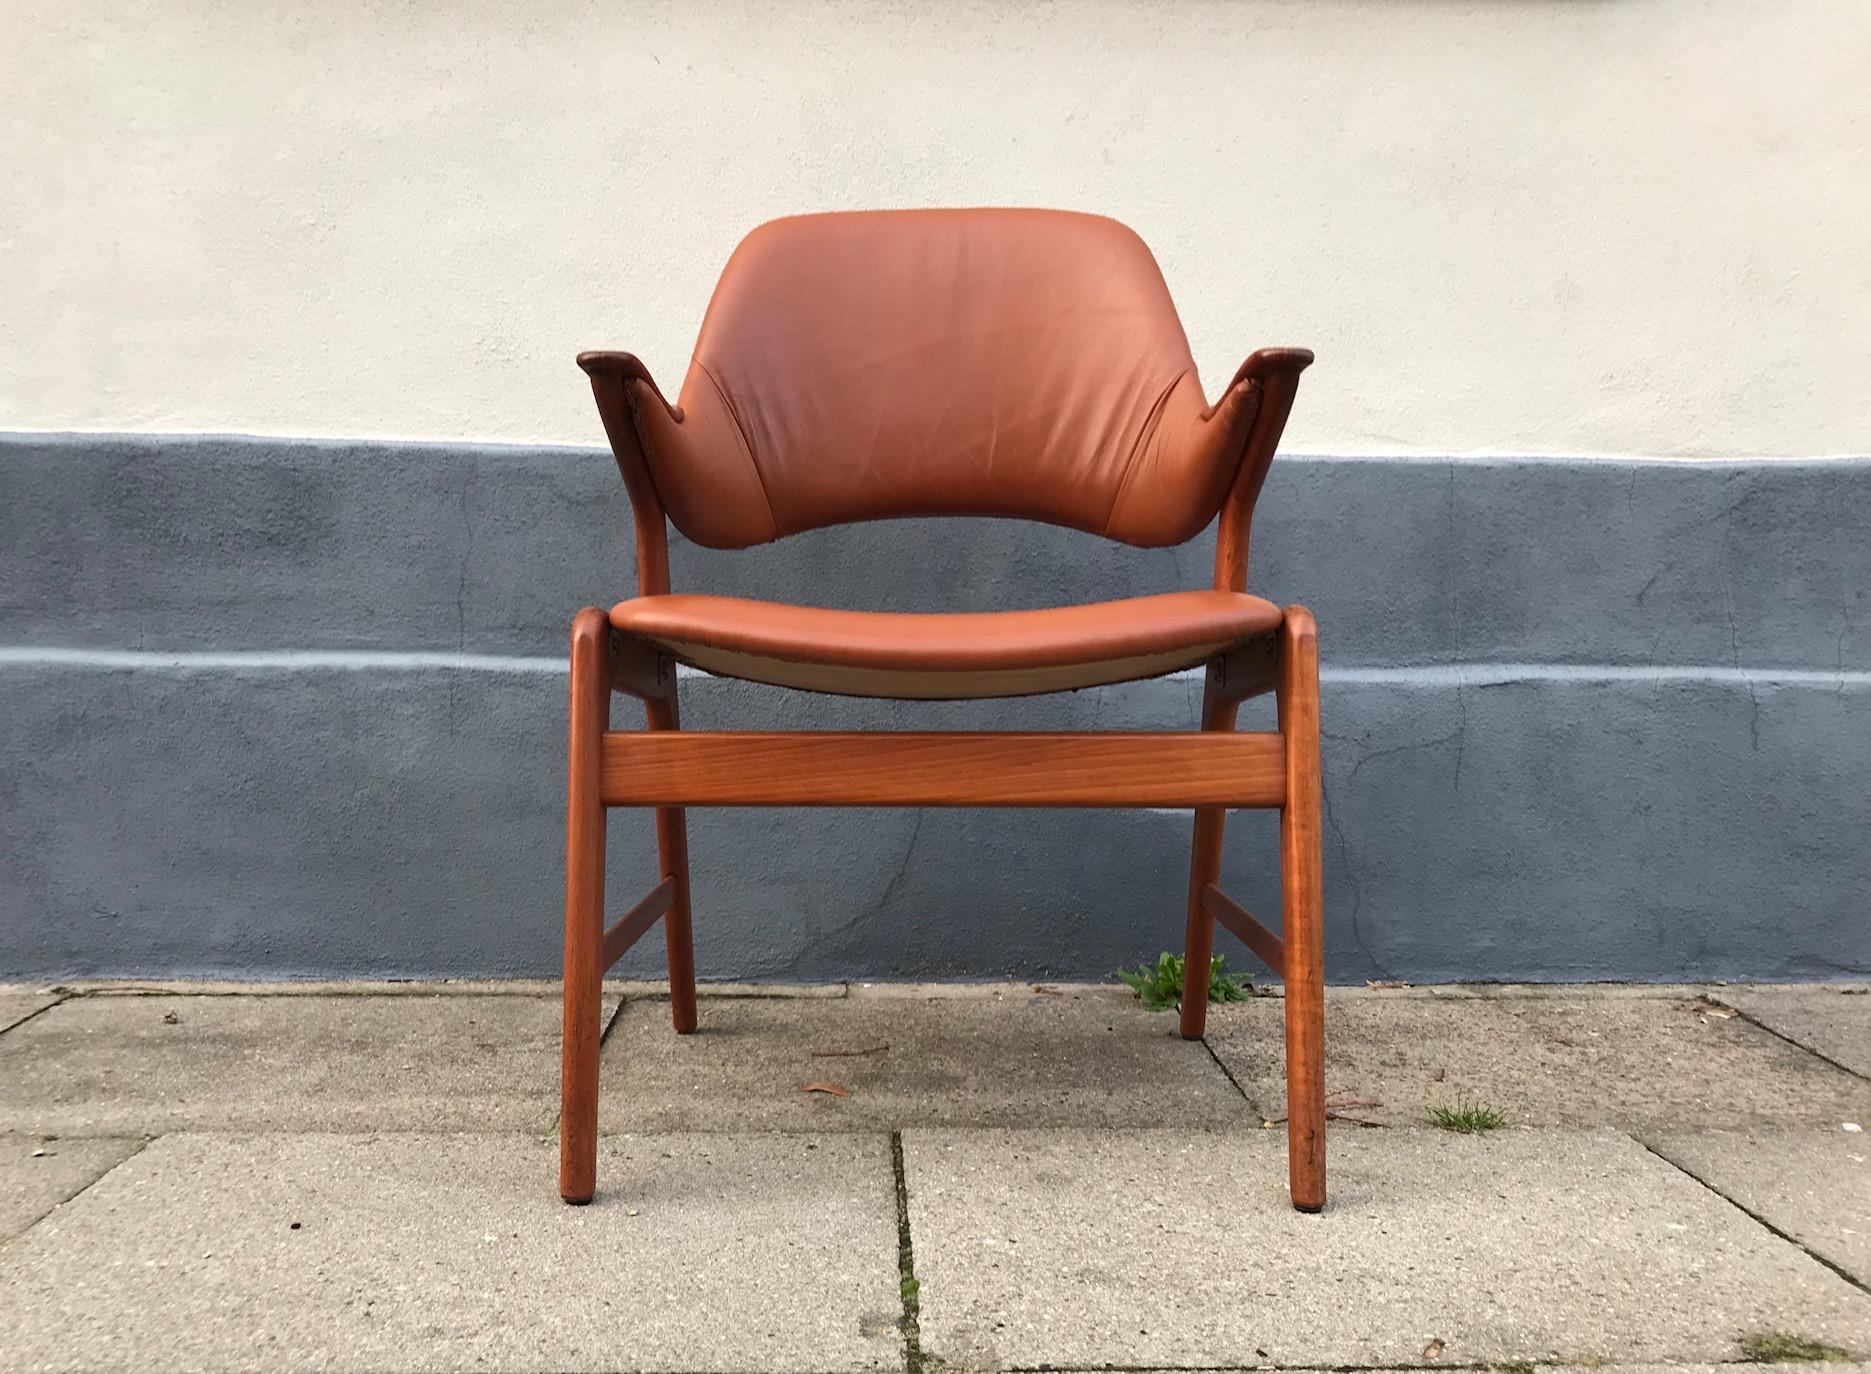 Danish Modern Teak and Leather Lounge Chair by N. A. Jørgensen, 1960s In Good Condition For Sale In Esbjerg, DK